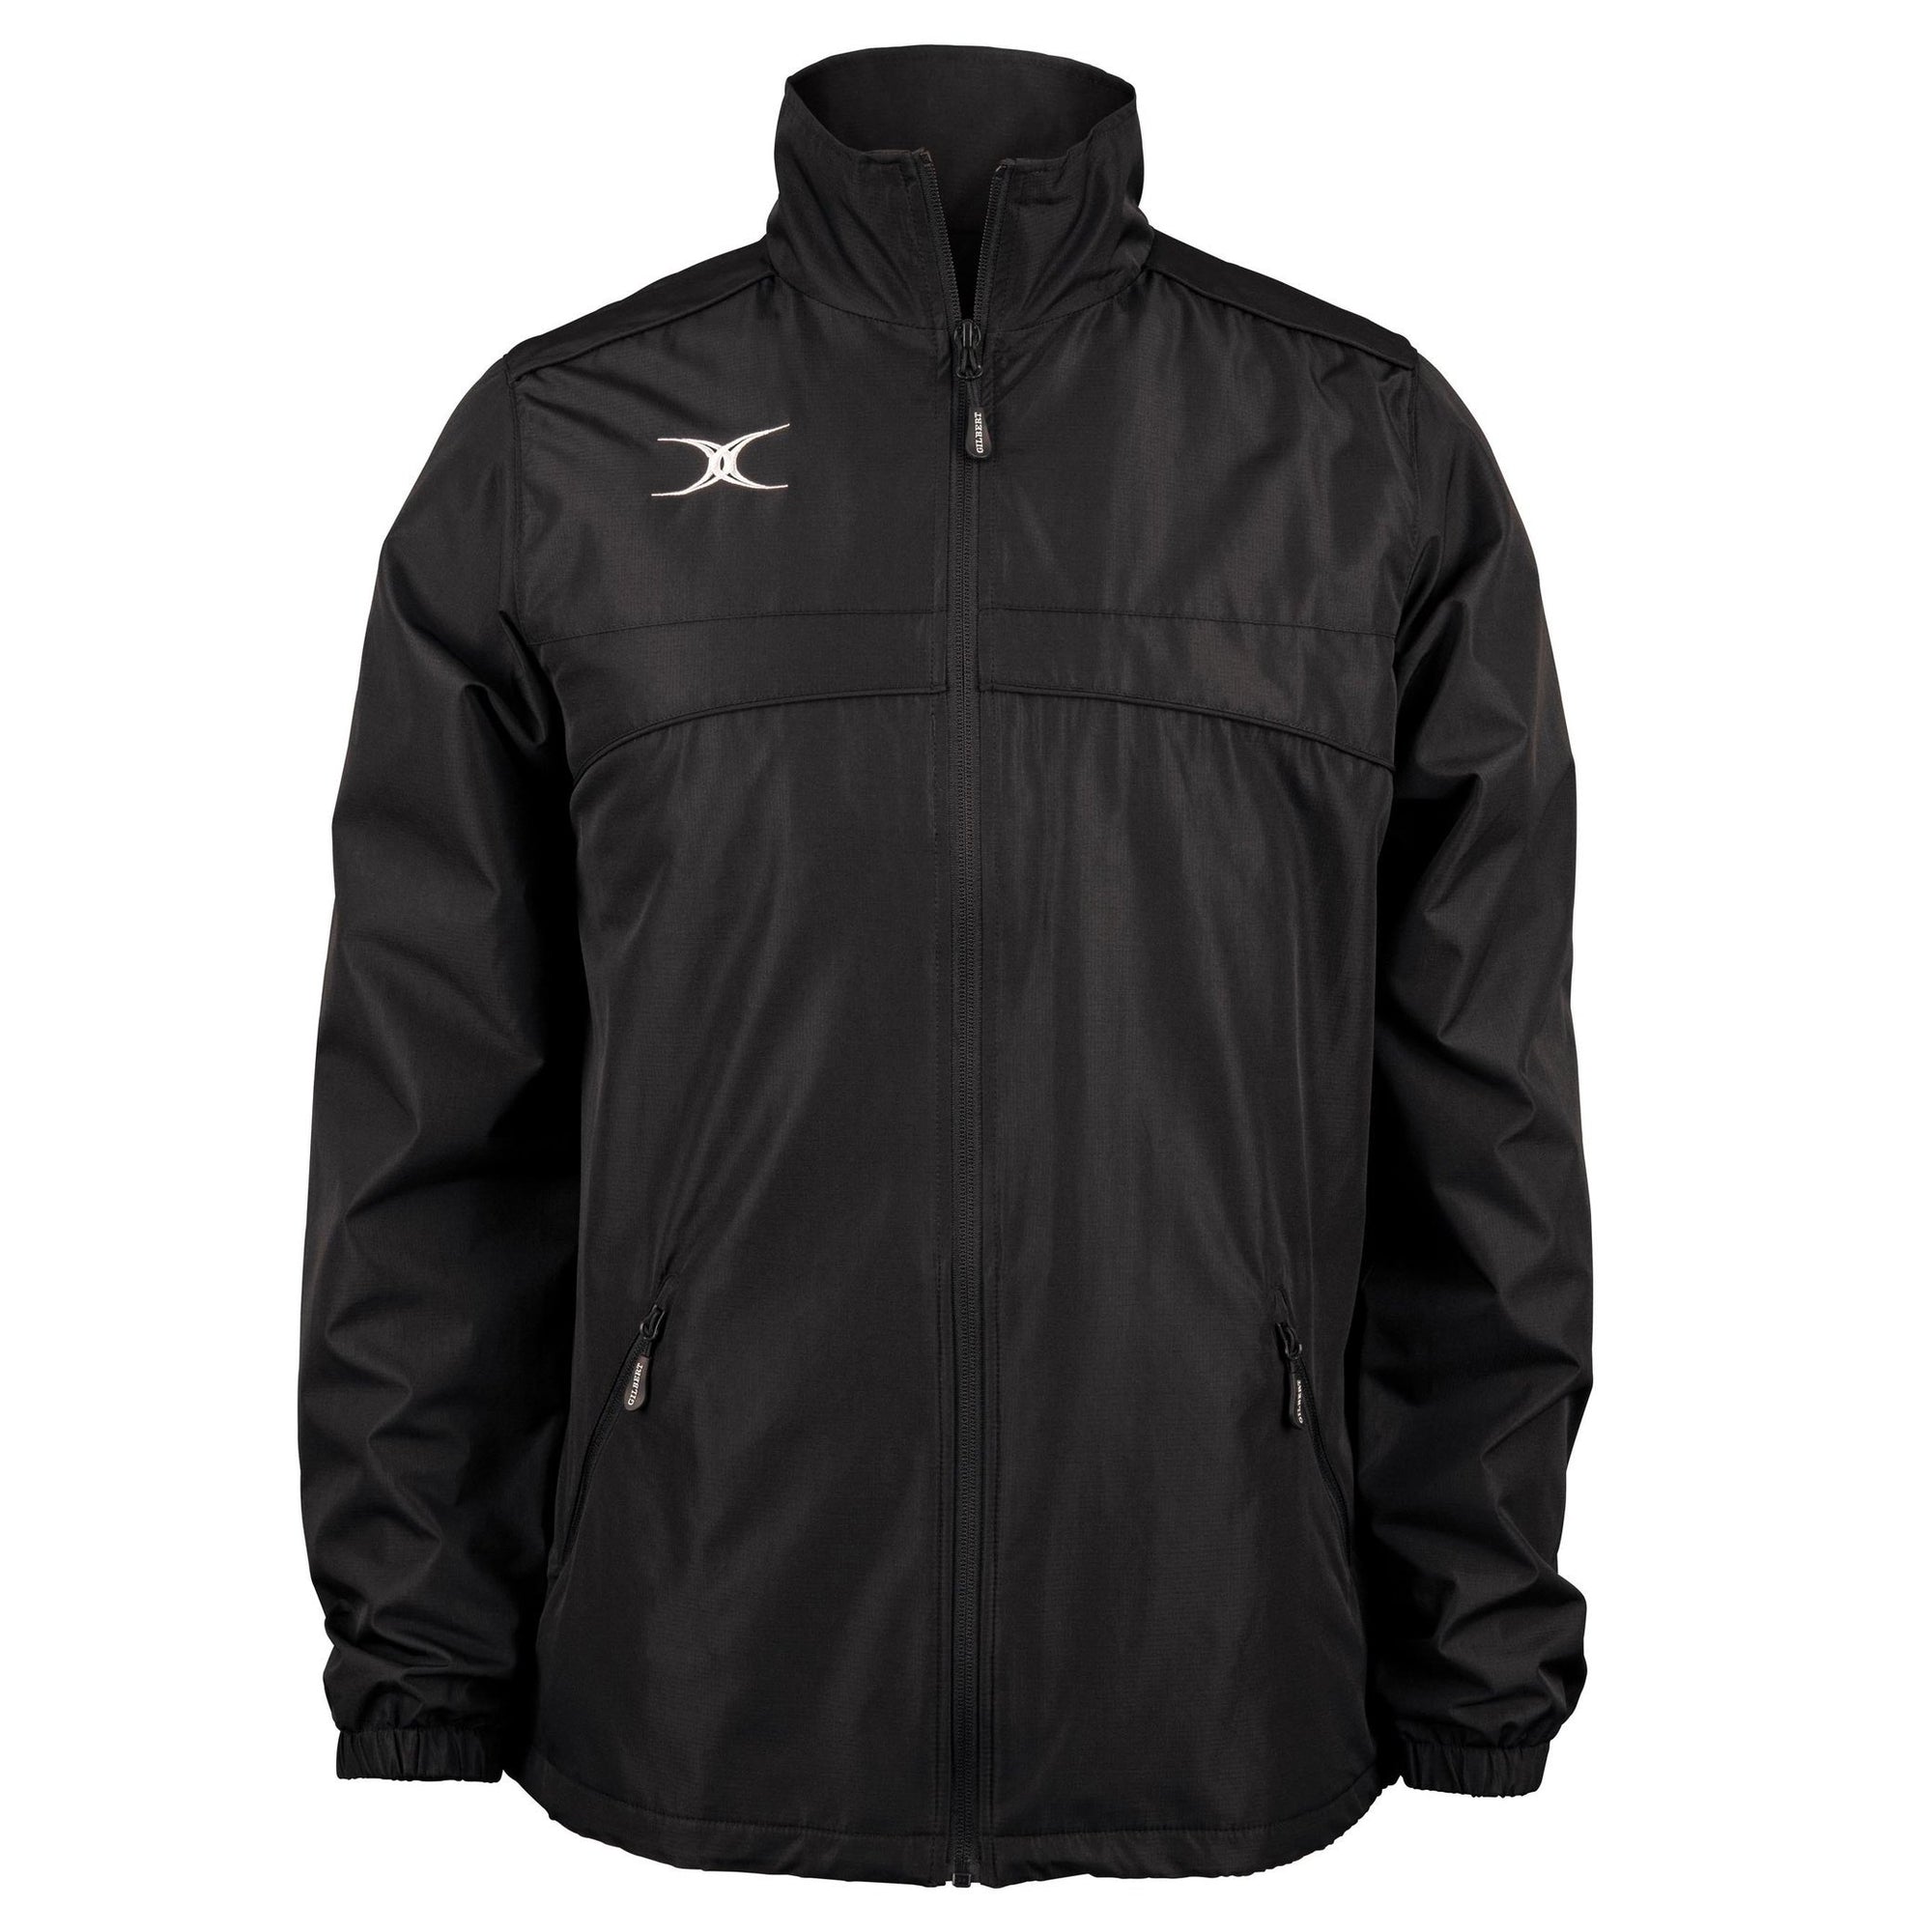 Rugby Imports Gilbert Photon Full Zip Jacket